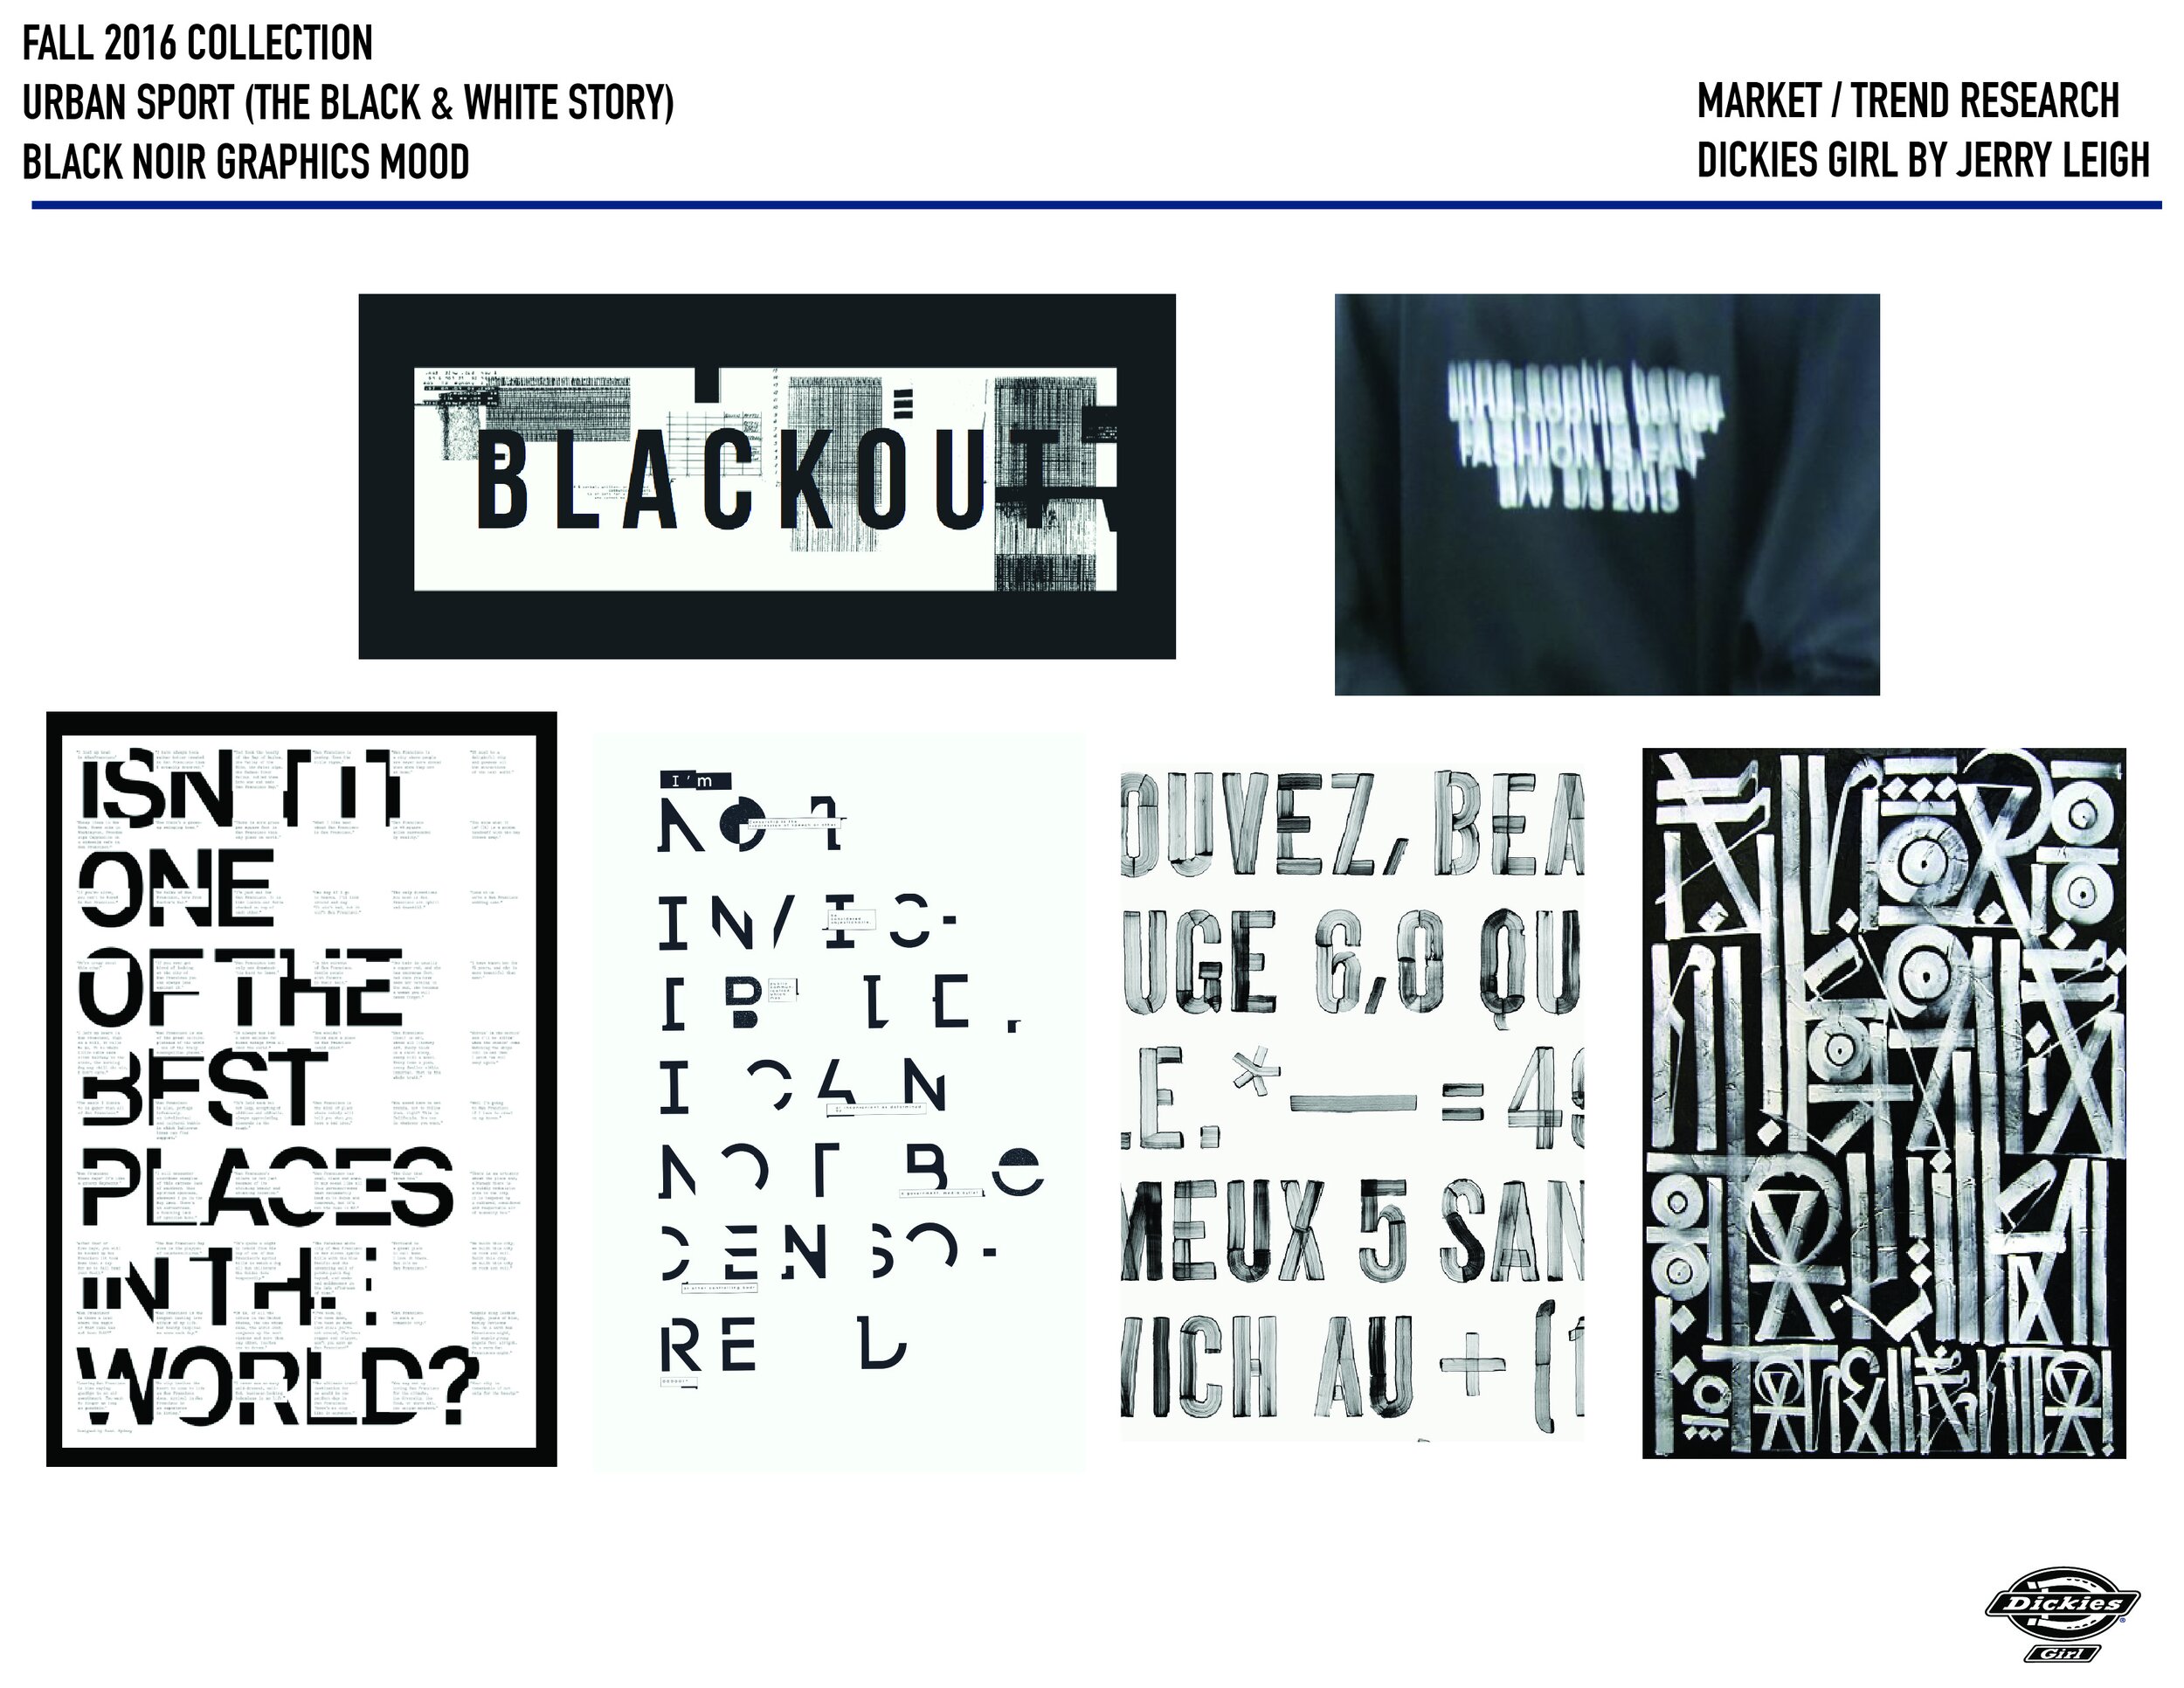 THE BLACK AND WHITE STORY TREND BOARDS 6_12-11.jpg